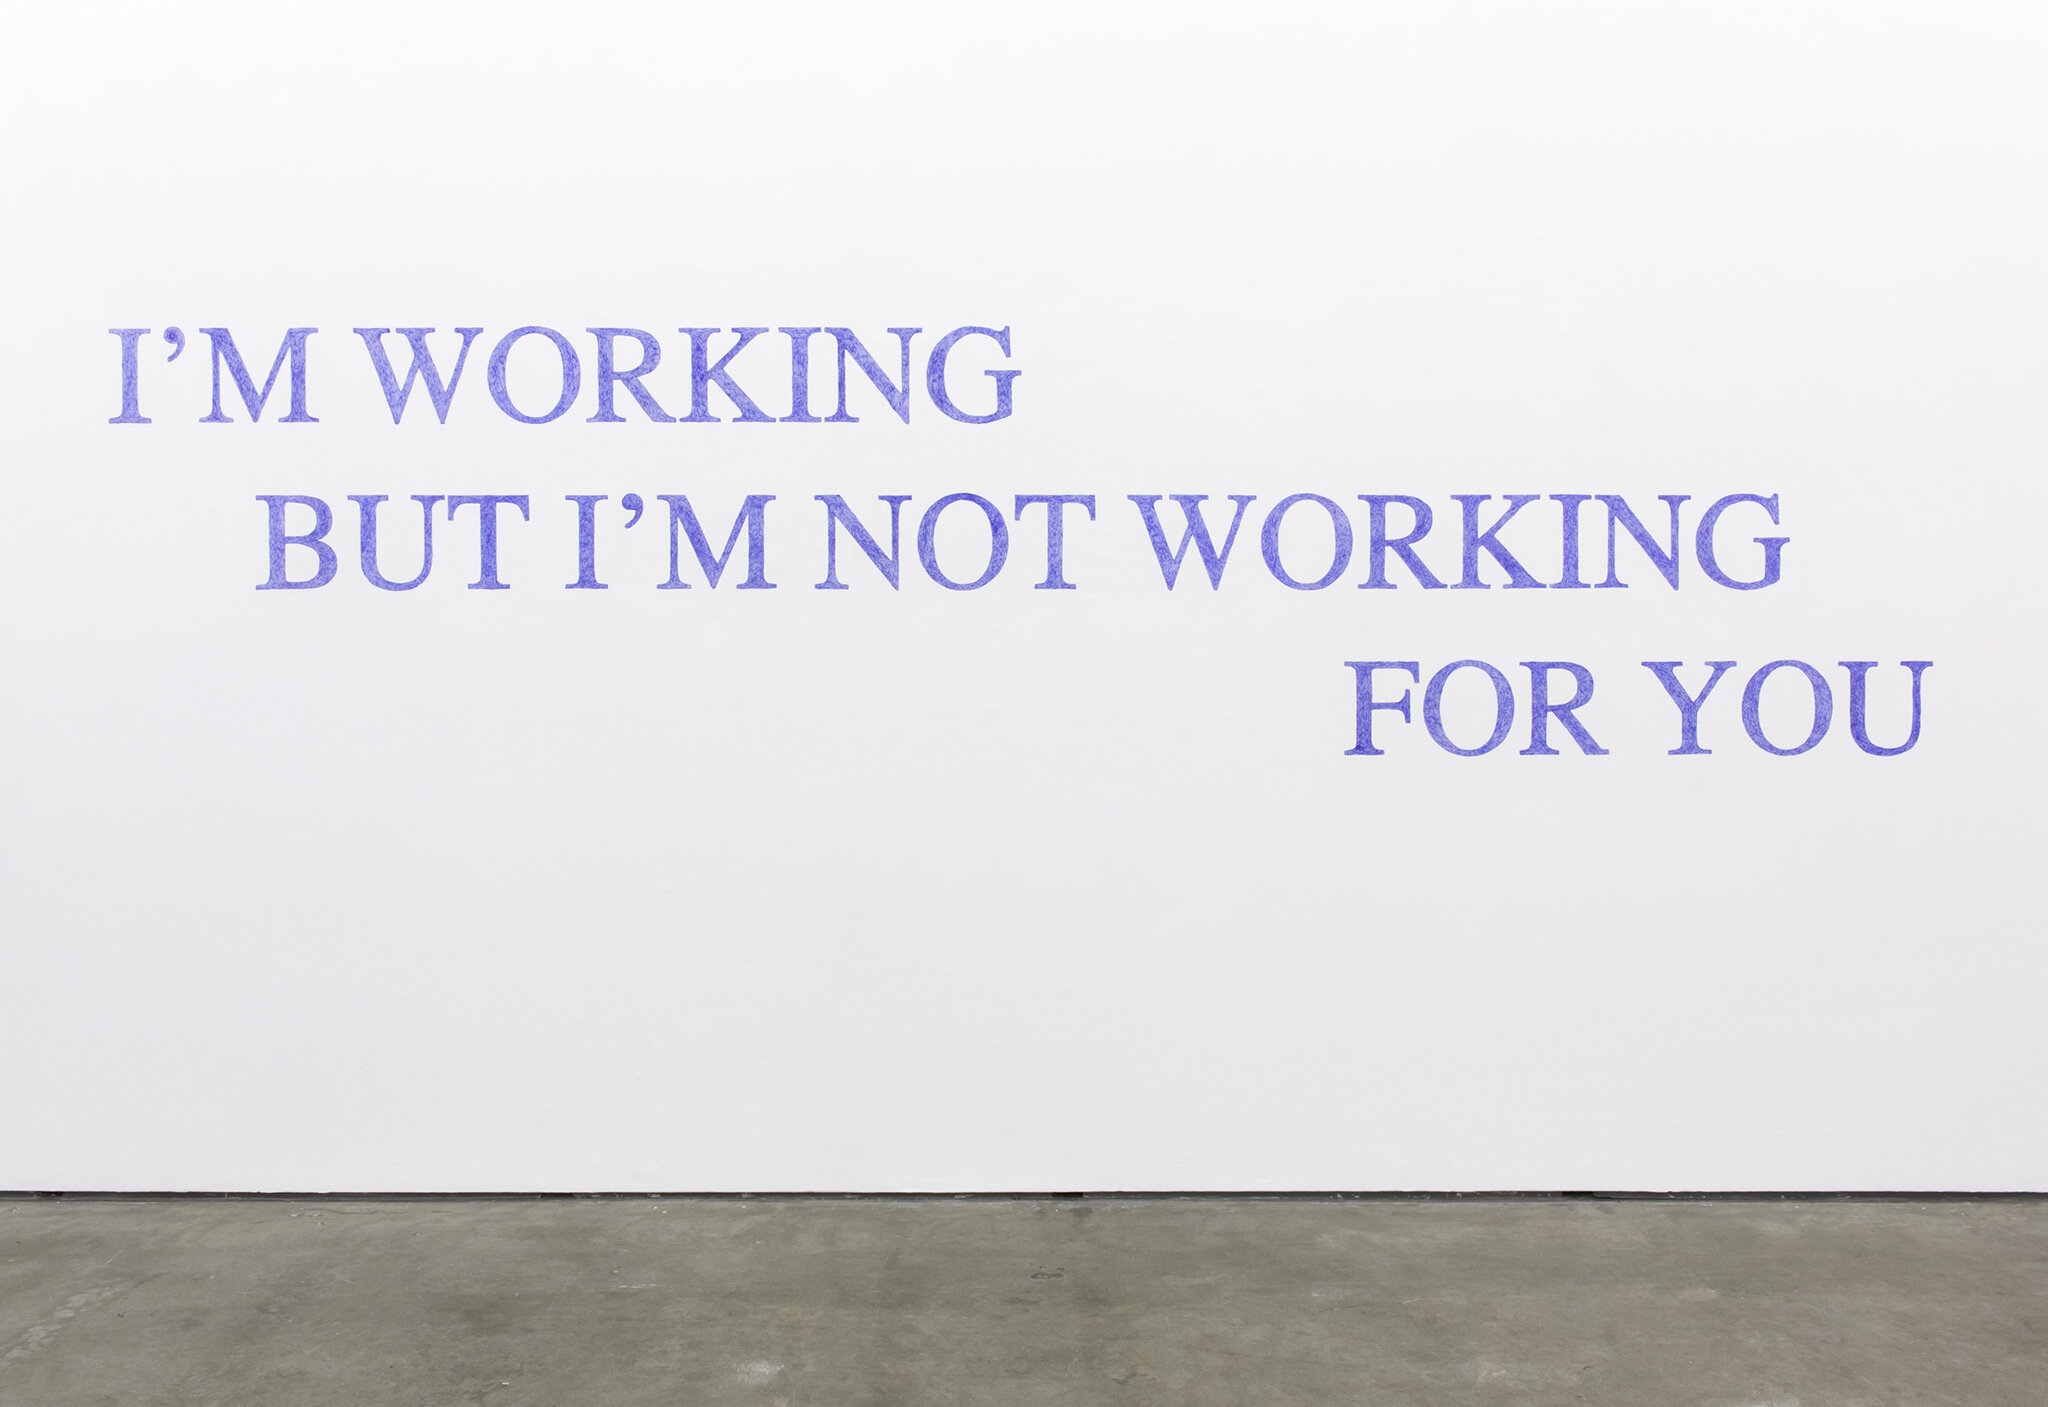 I'm Working but I'm not Working for You, 2020, ballpoint pen on wall.